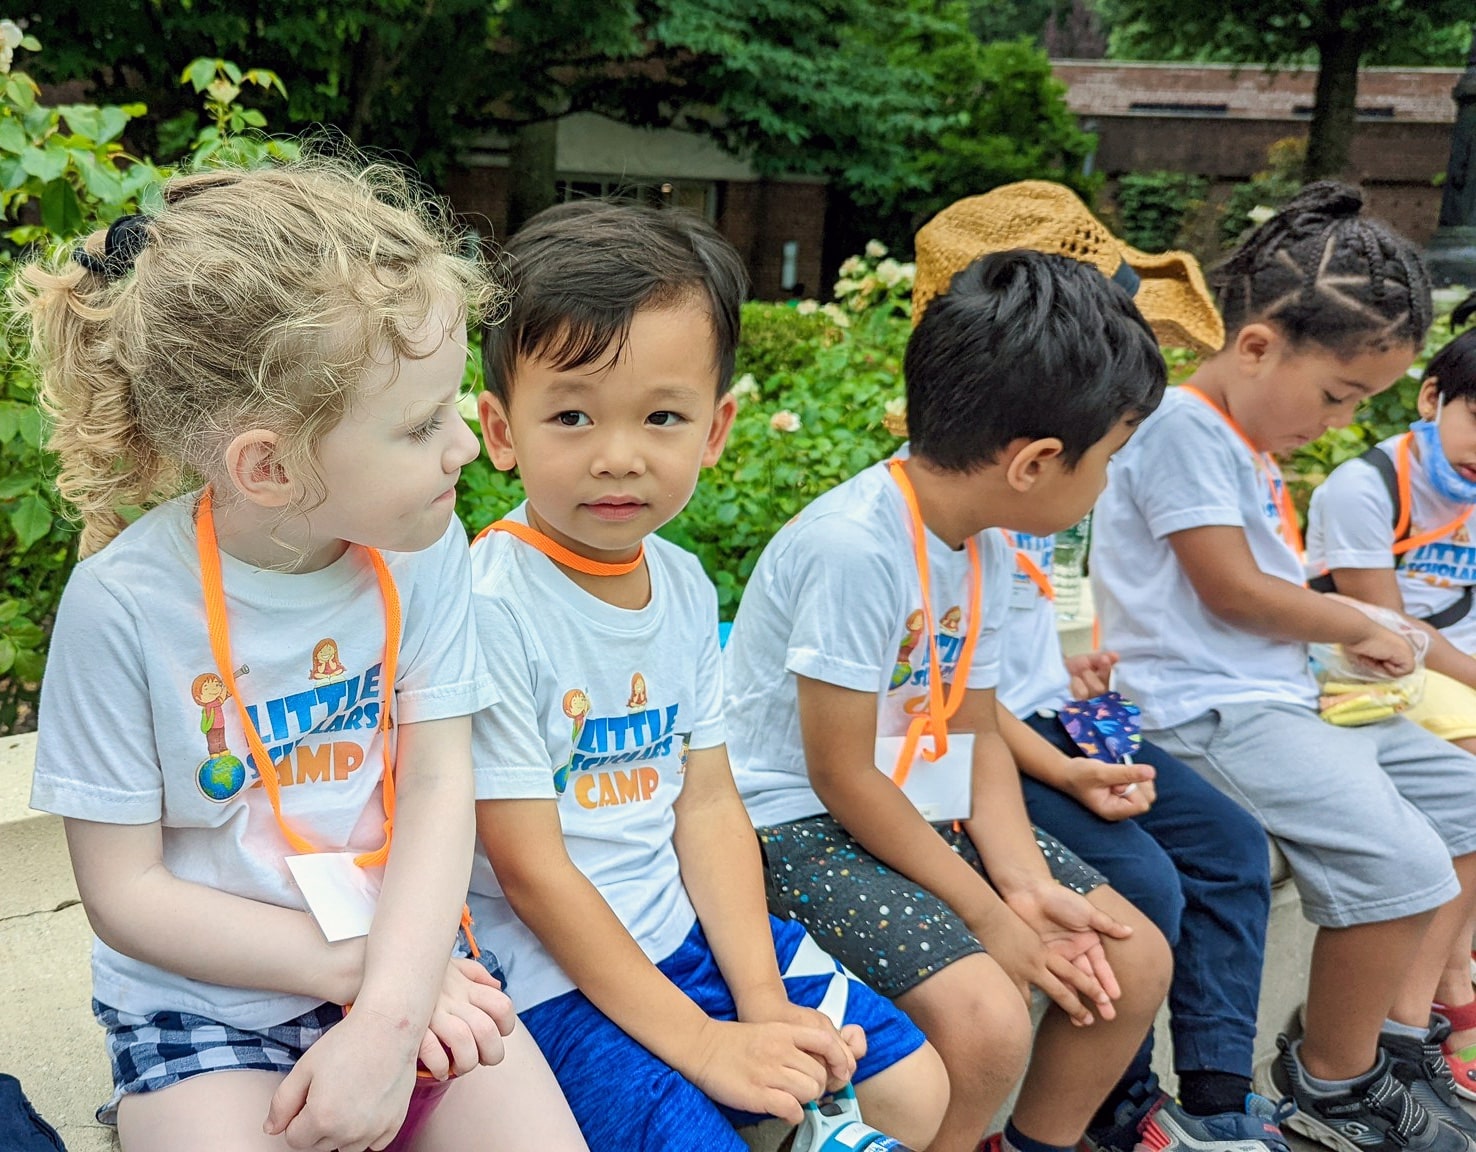 Group of preschool children with lanyards sitting together on a bench during a summer camp field trip